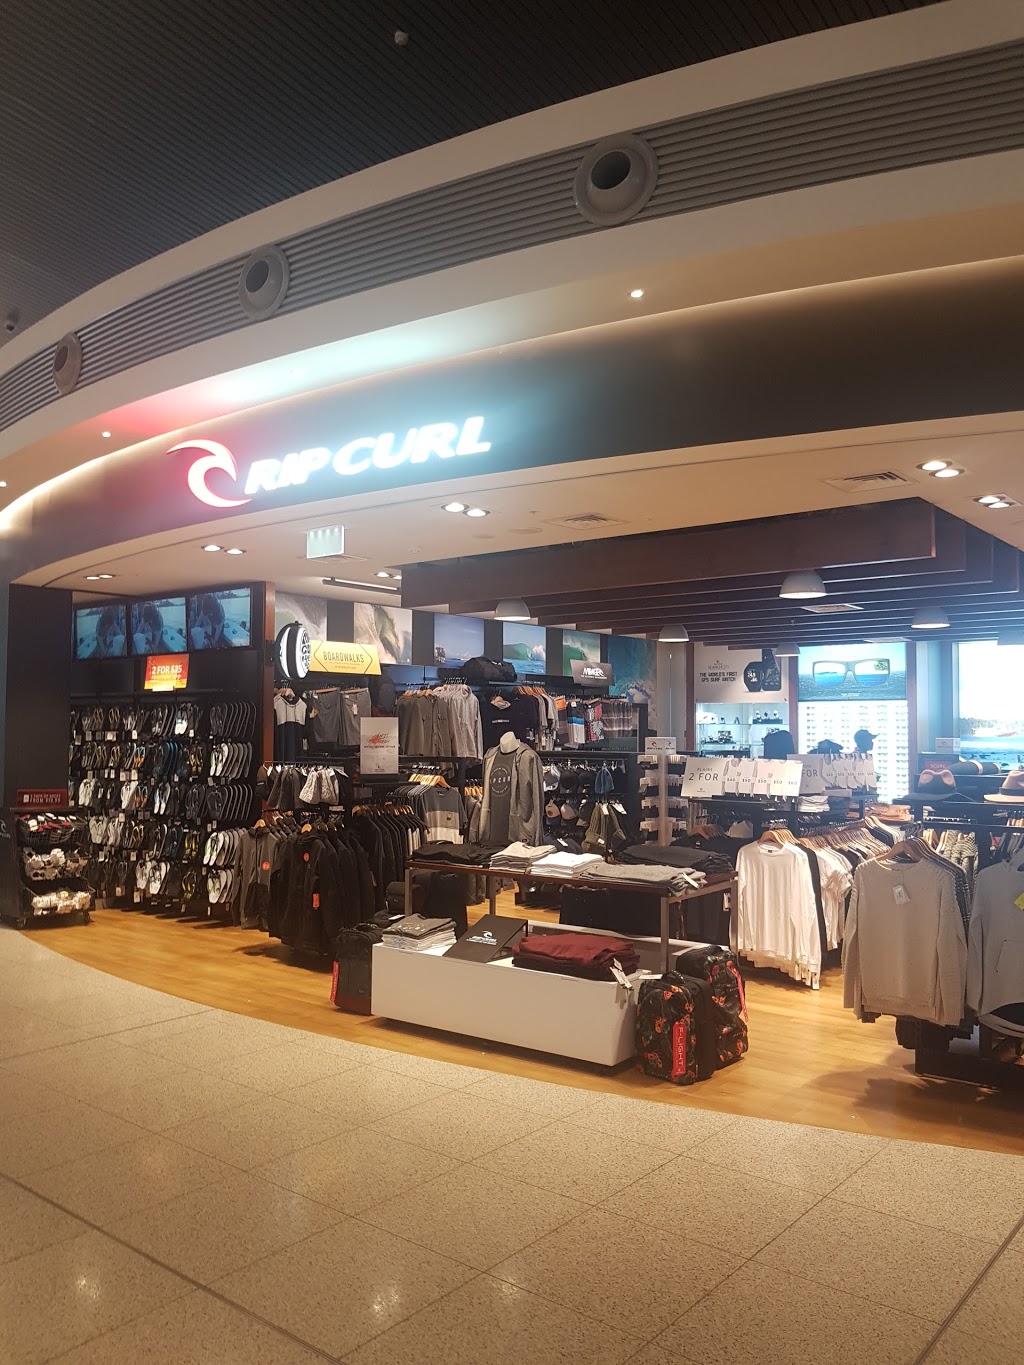 Rip Curl Perth Domestic Airport T1 | clothing store | 383 Horrie Miller Dr, Perth Airport WA 6105, Australia | 0894771222 OR +61 8 9477 1222